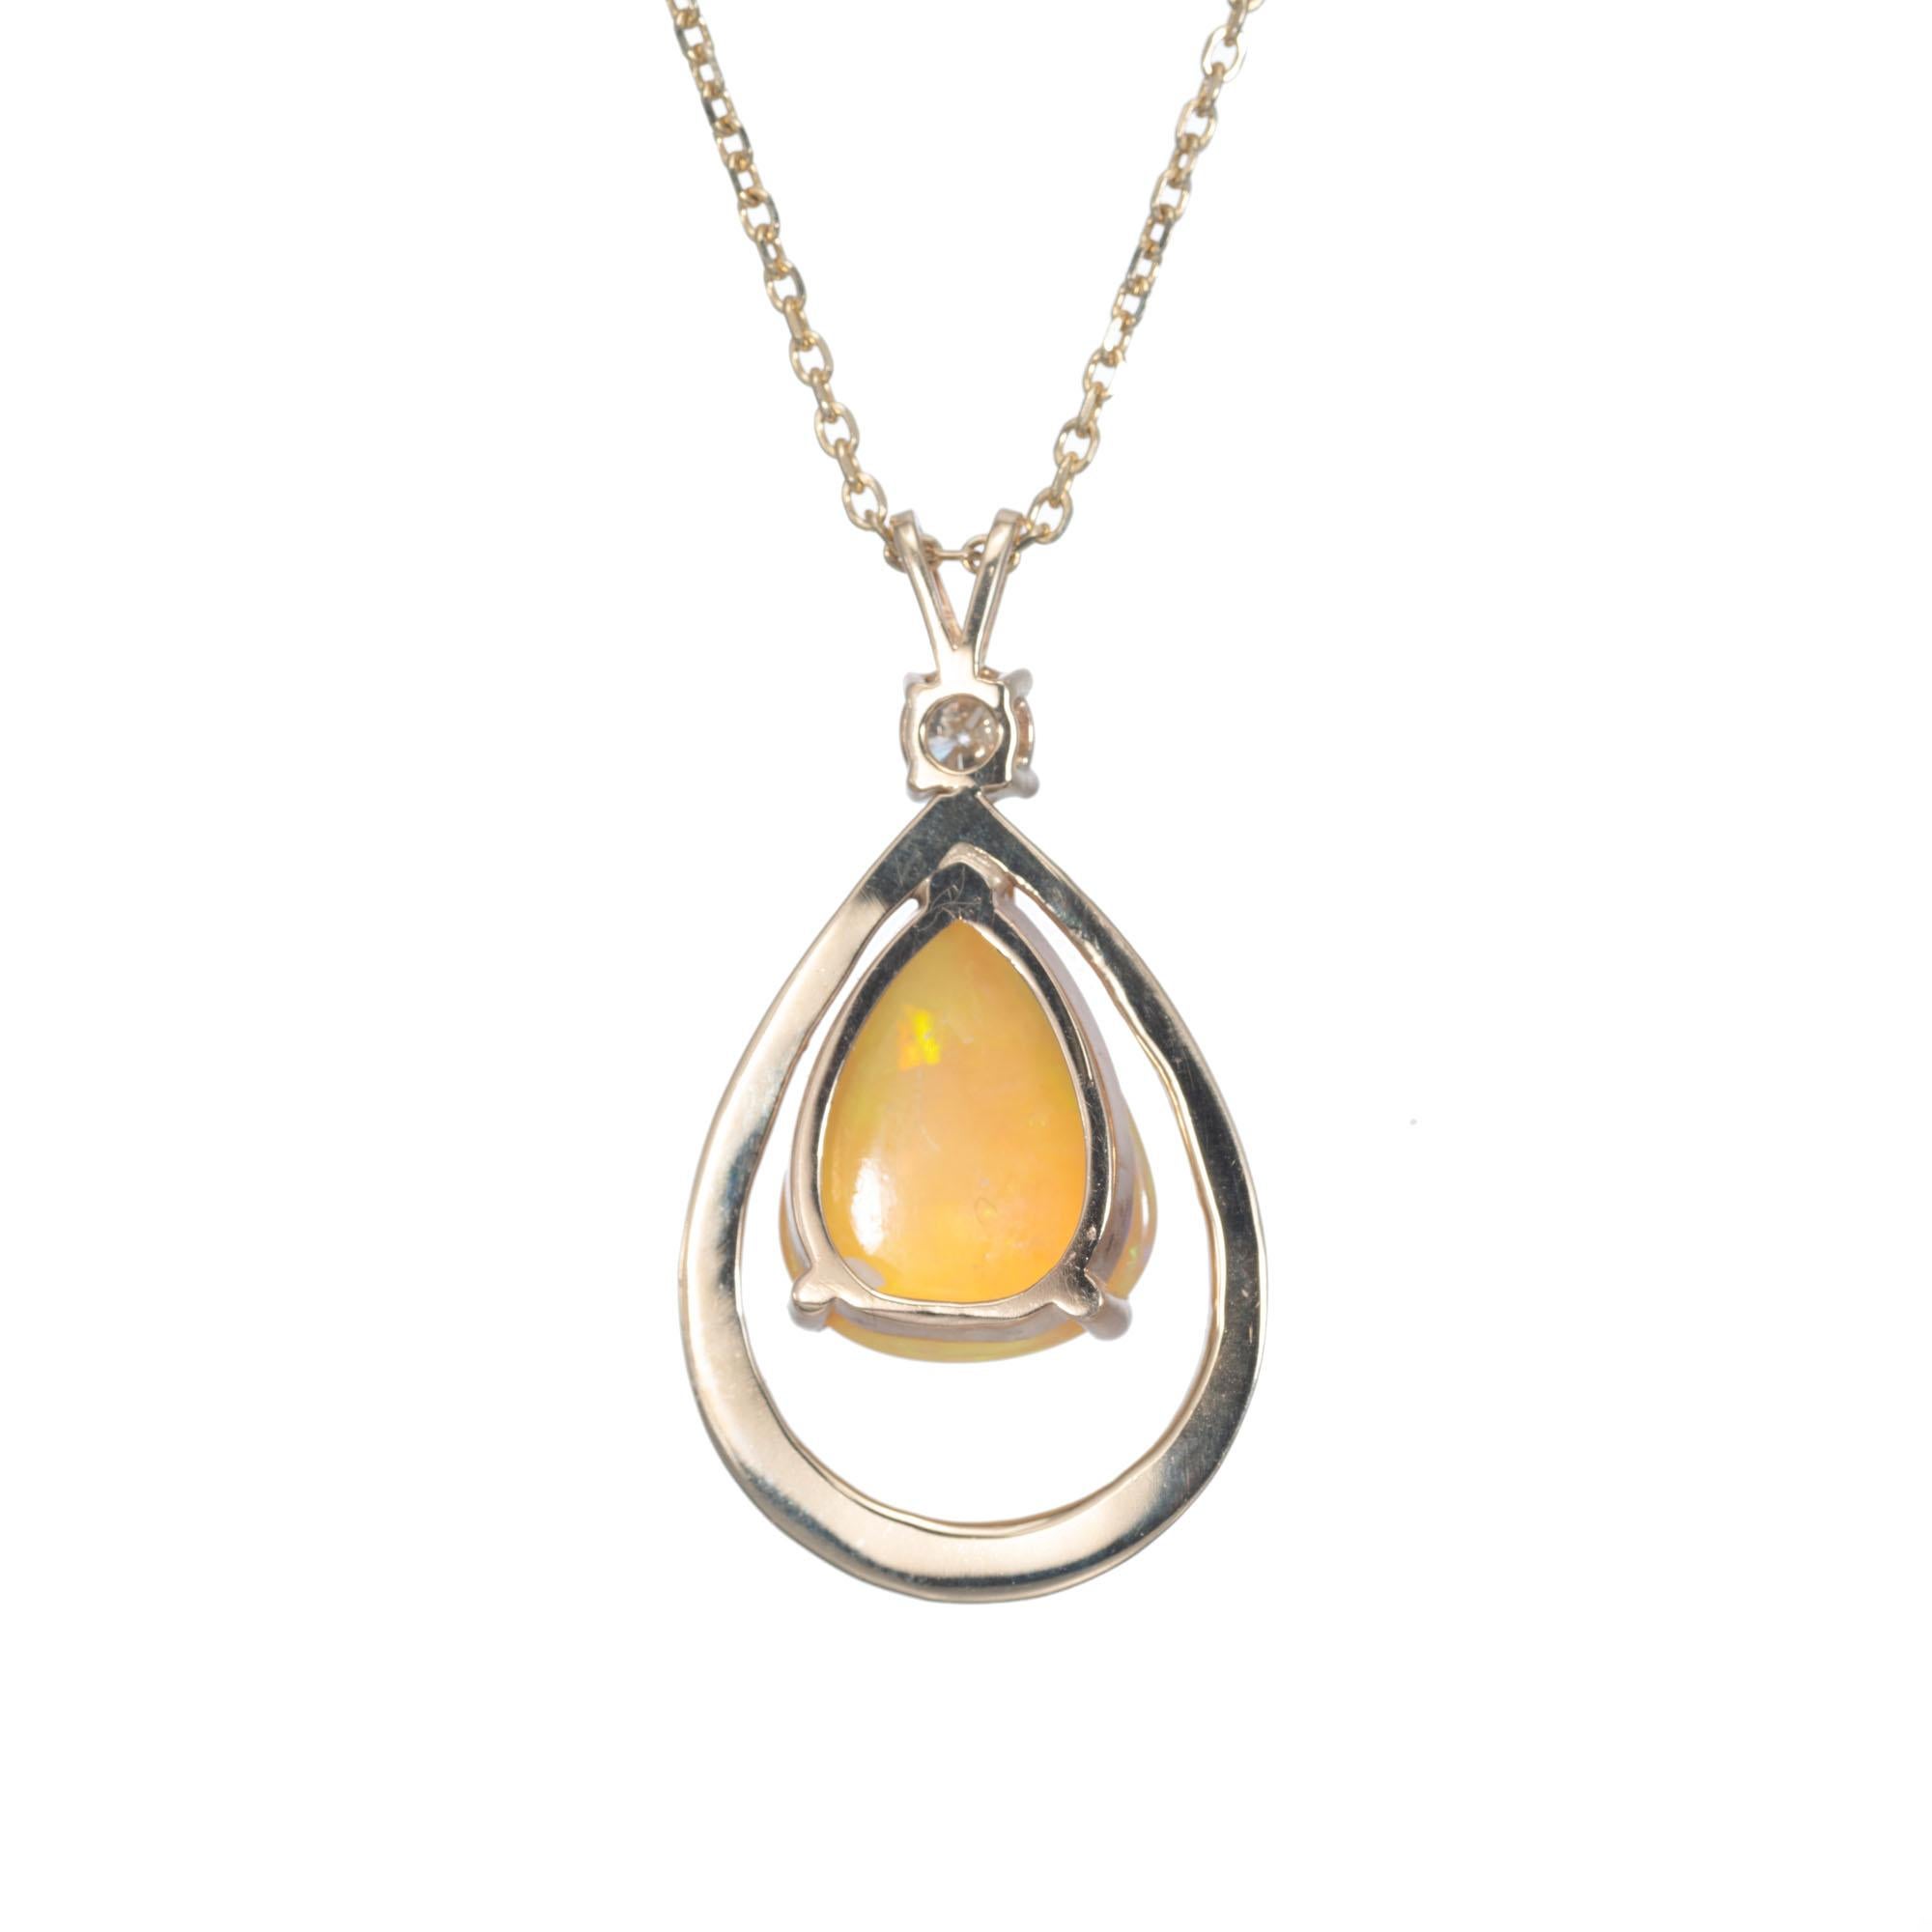 Orange yellow green translucent pear-shaped opal in a brushed pear shape 14k yellow gold setting, with a .20 round accent diamond. 18 inch chain

1 pear shape orange yellow green opal, approx. 4.00cts
1 round brilliant cut diamond J, SI2, approx.